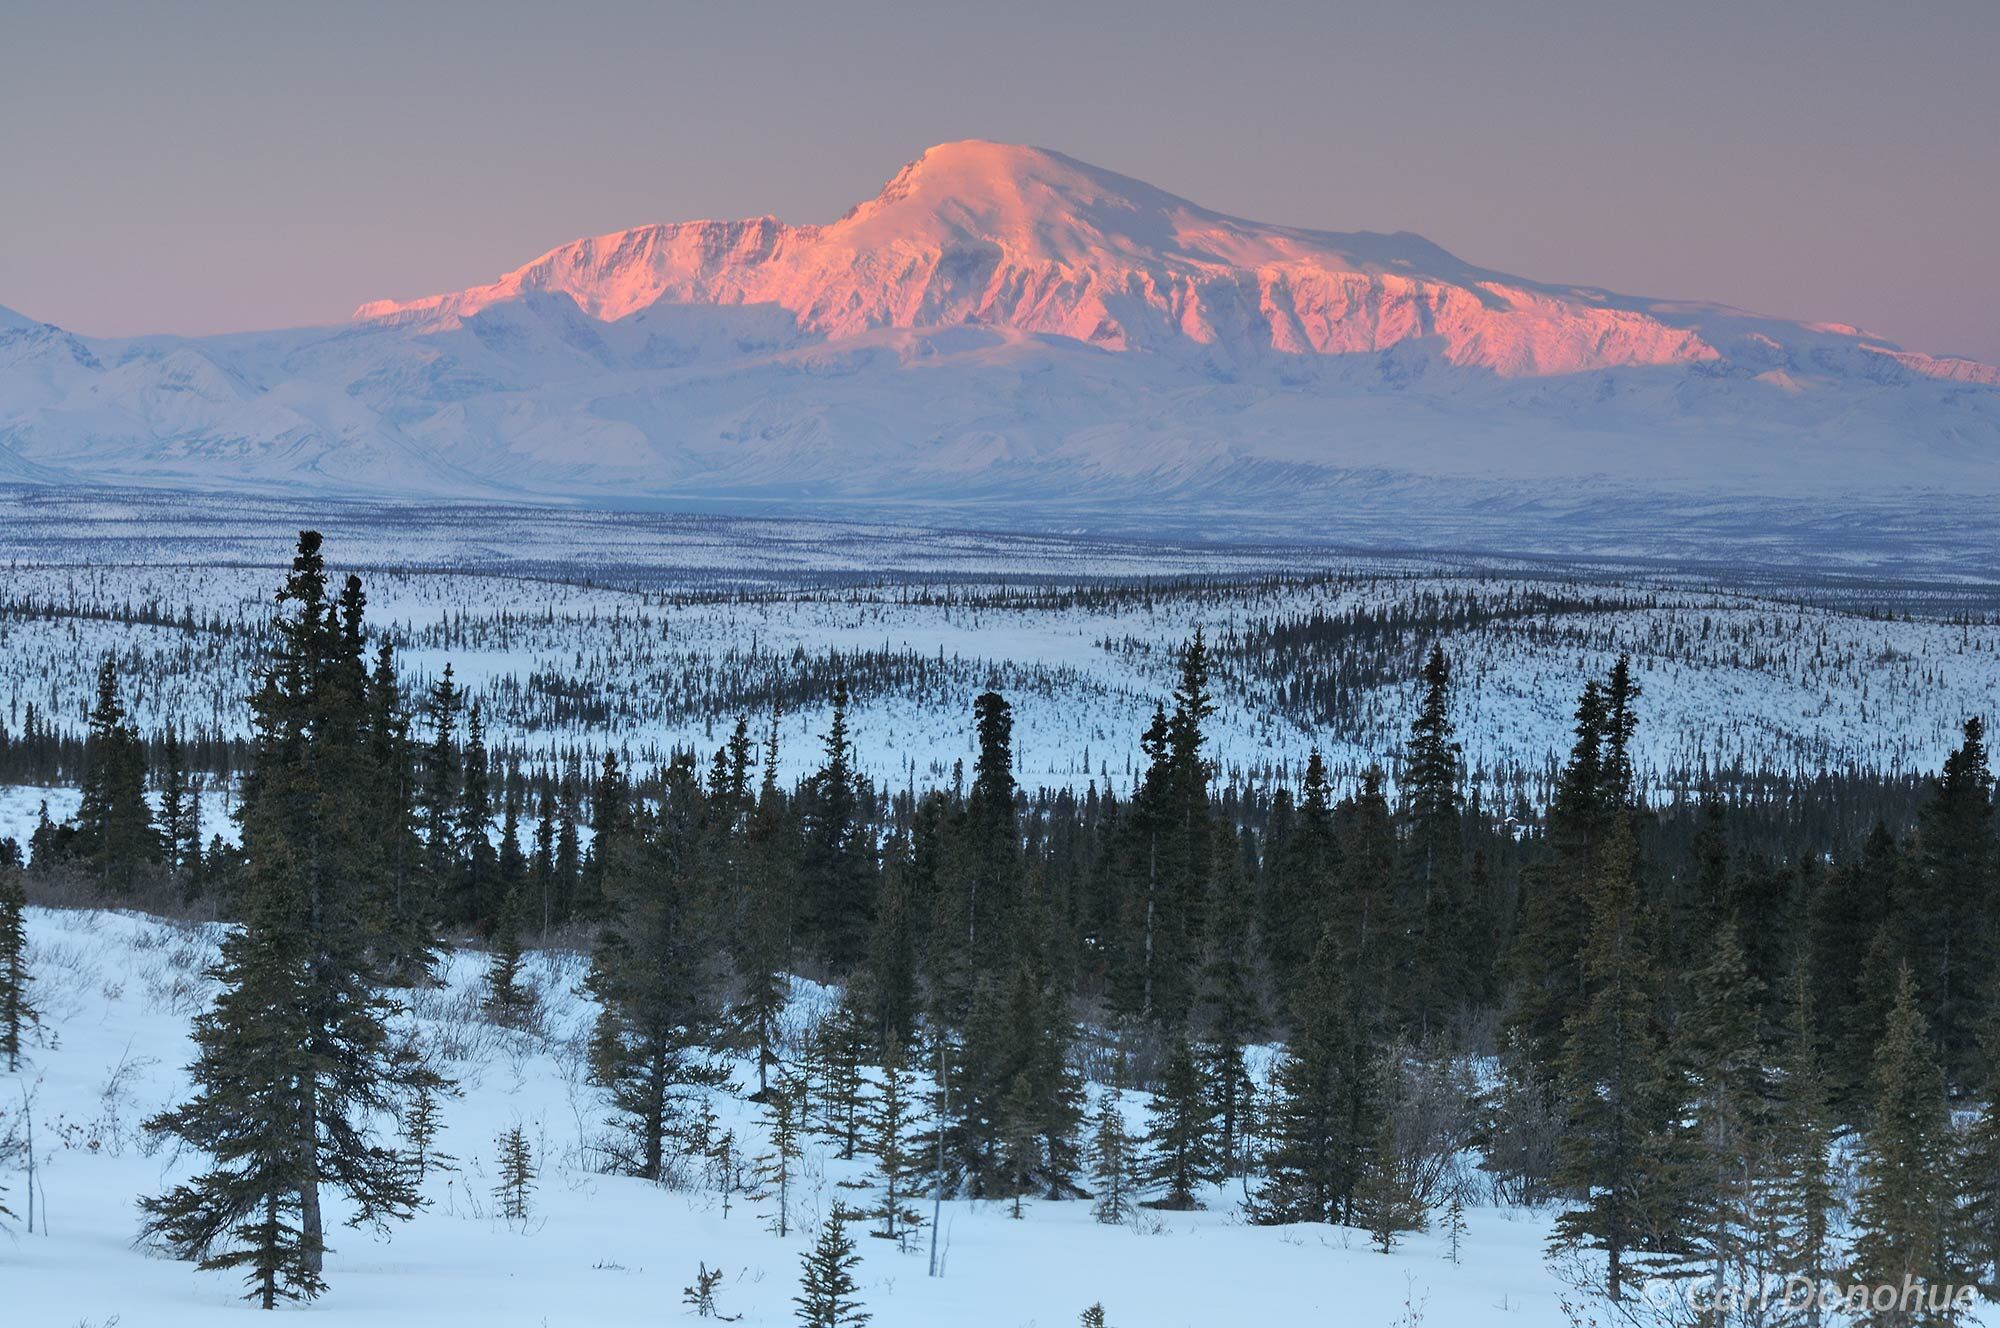 Mount Sanford at dawn. Alpenglow lights up the peak of Mount Sanford, across the broken boreal forest of the Copper River Basin...